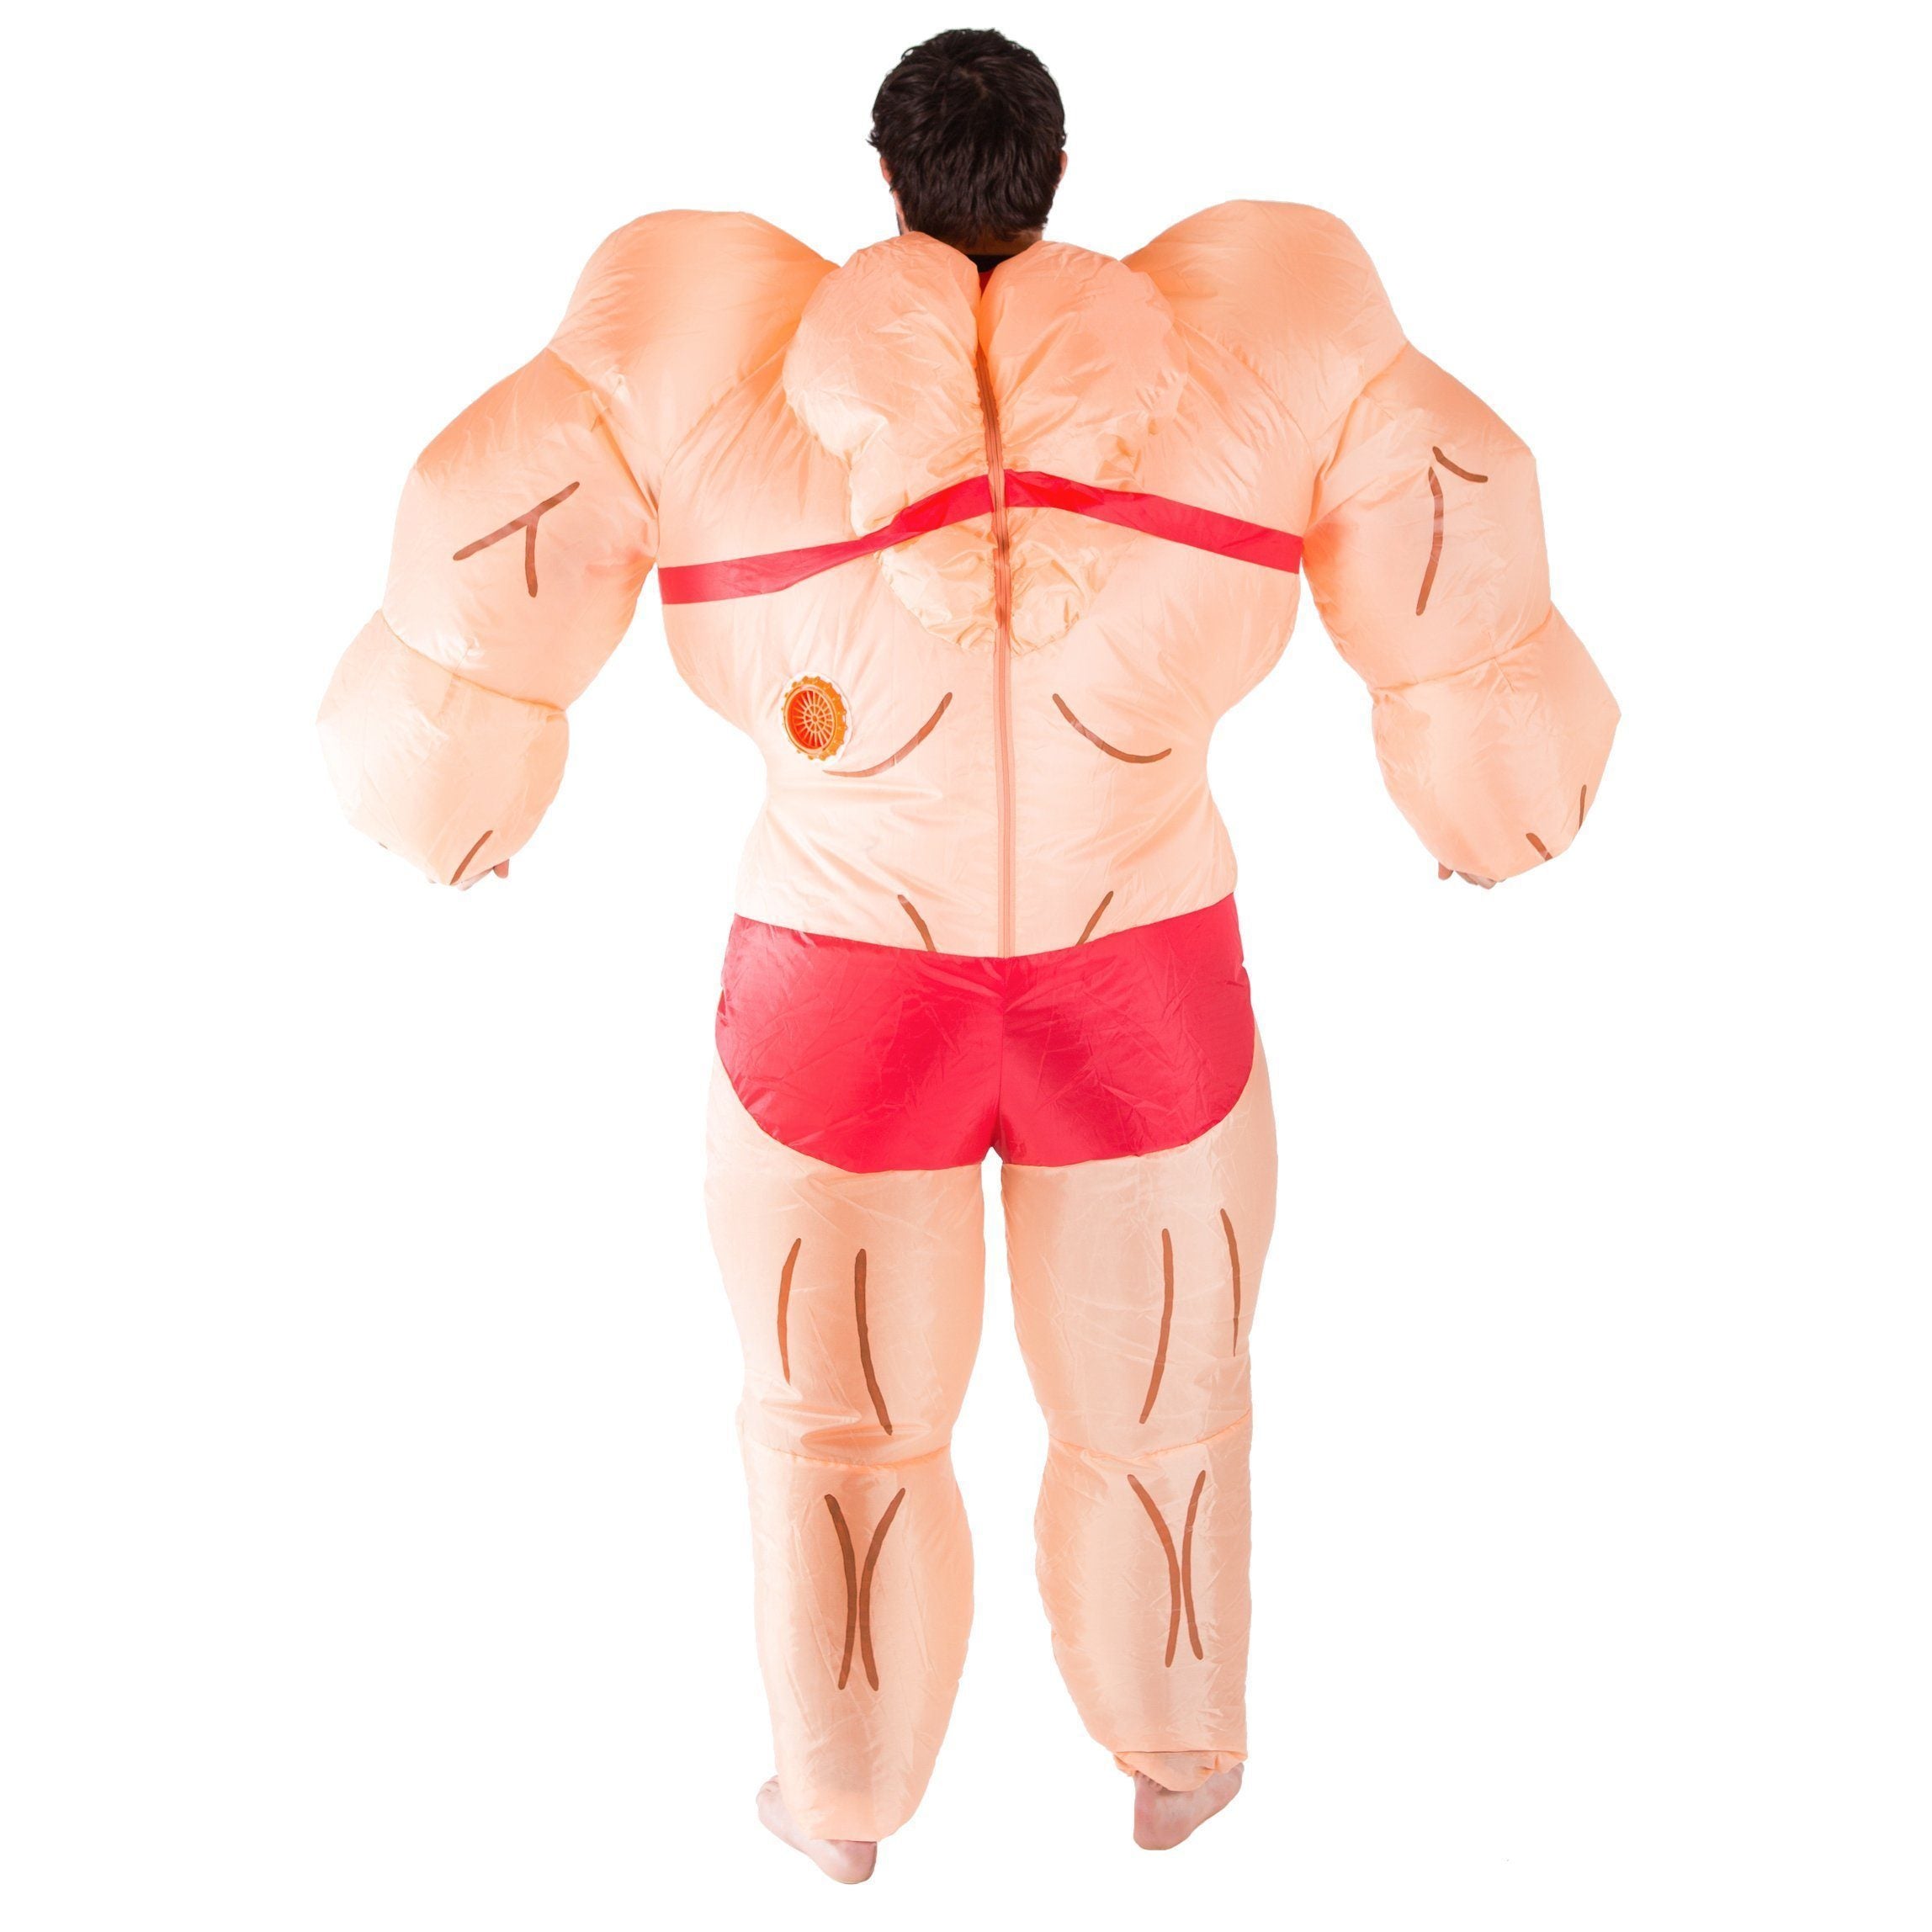 Fancy Dress - Inflatable Lady Muscle Suit Costume